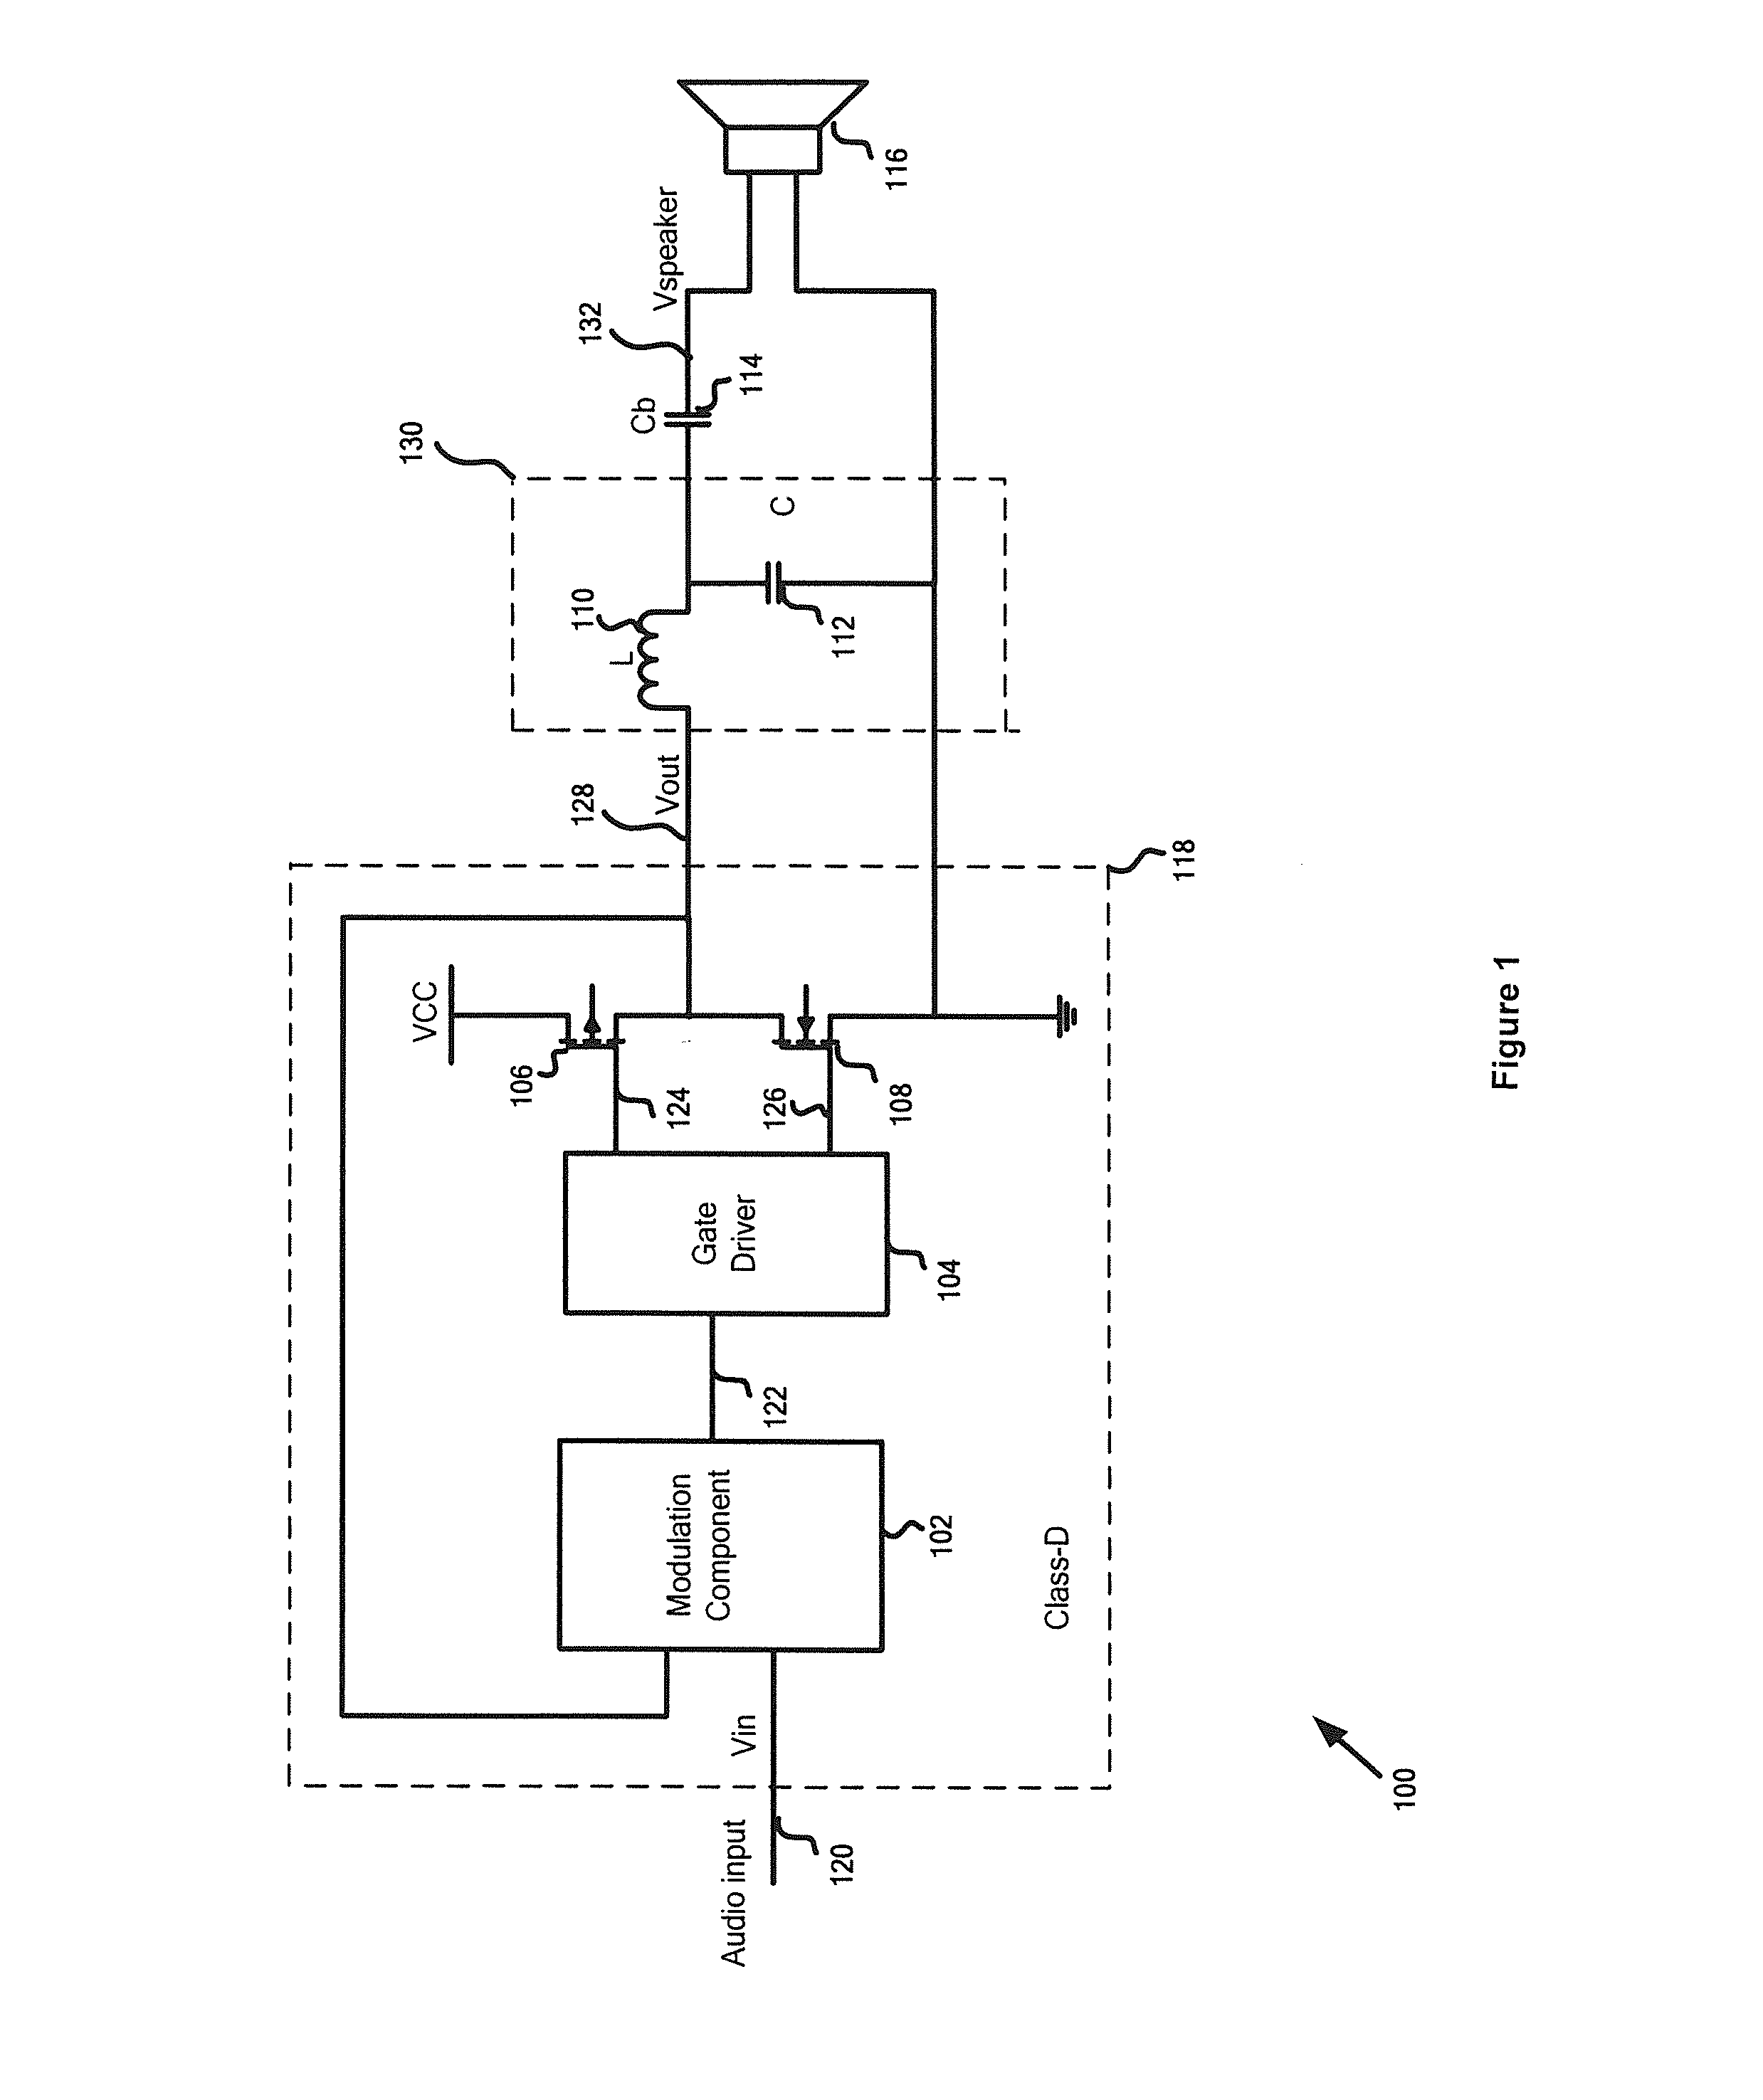 Amplification systems and methods with distortion reductions